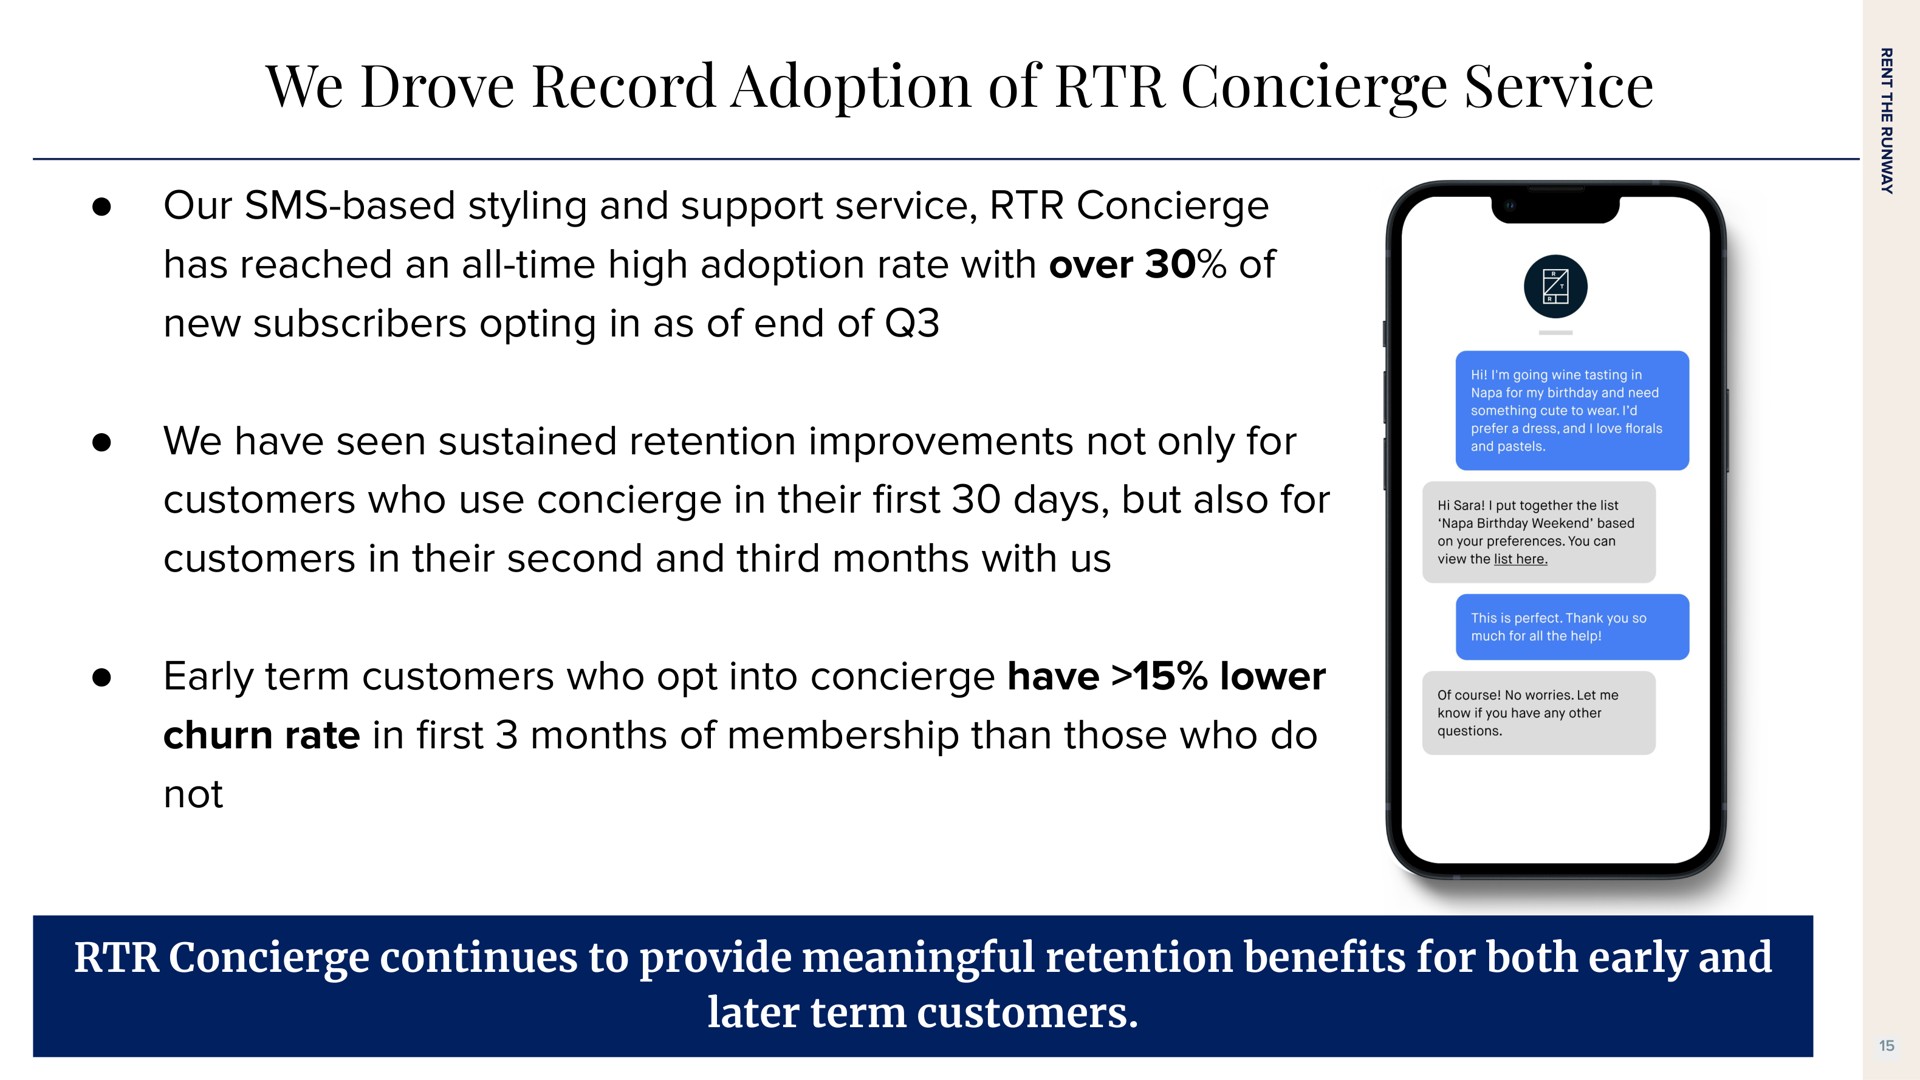 we drove record adoption of concierge service our based styling and support service concierge has reached an all time high adoption rate with over of new subscribers opting in as of end of we have seen sustained retention improvements not only for customers who use concierge in their days but also for customers in their second and third months with us early term customers who opt into concierge have lower churn rate in months of membership than those who do not concierge continues to provide meaningful retention bene for both early and later term customers first benefits | Rent The Runway